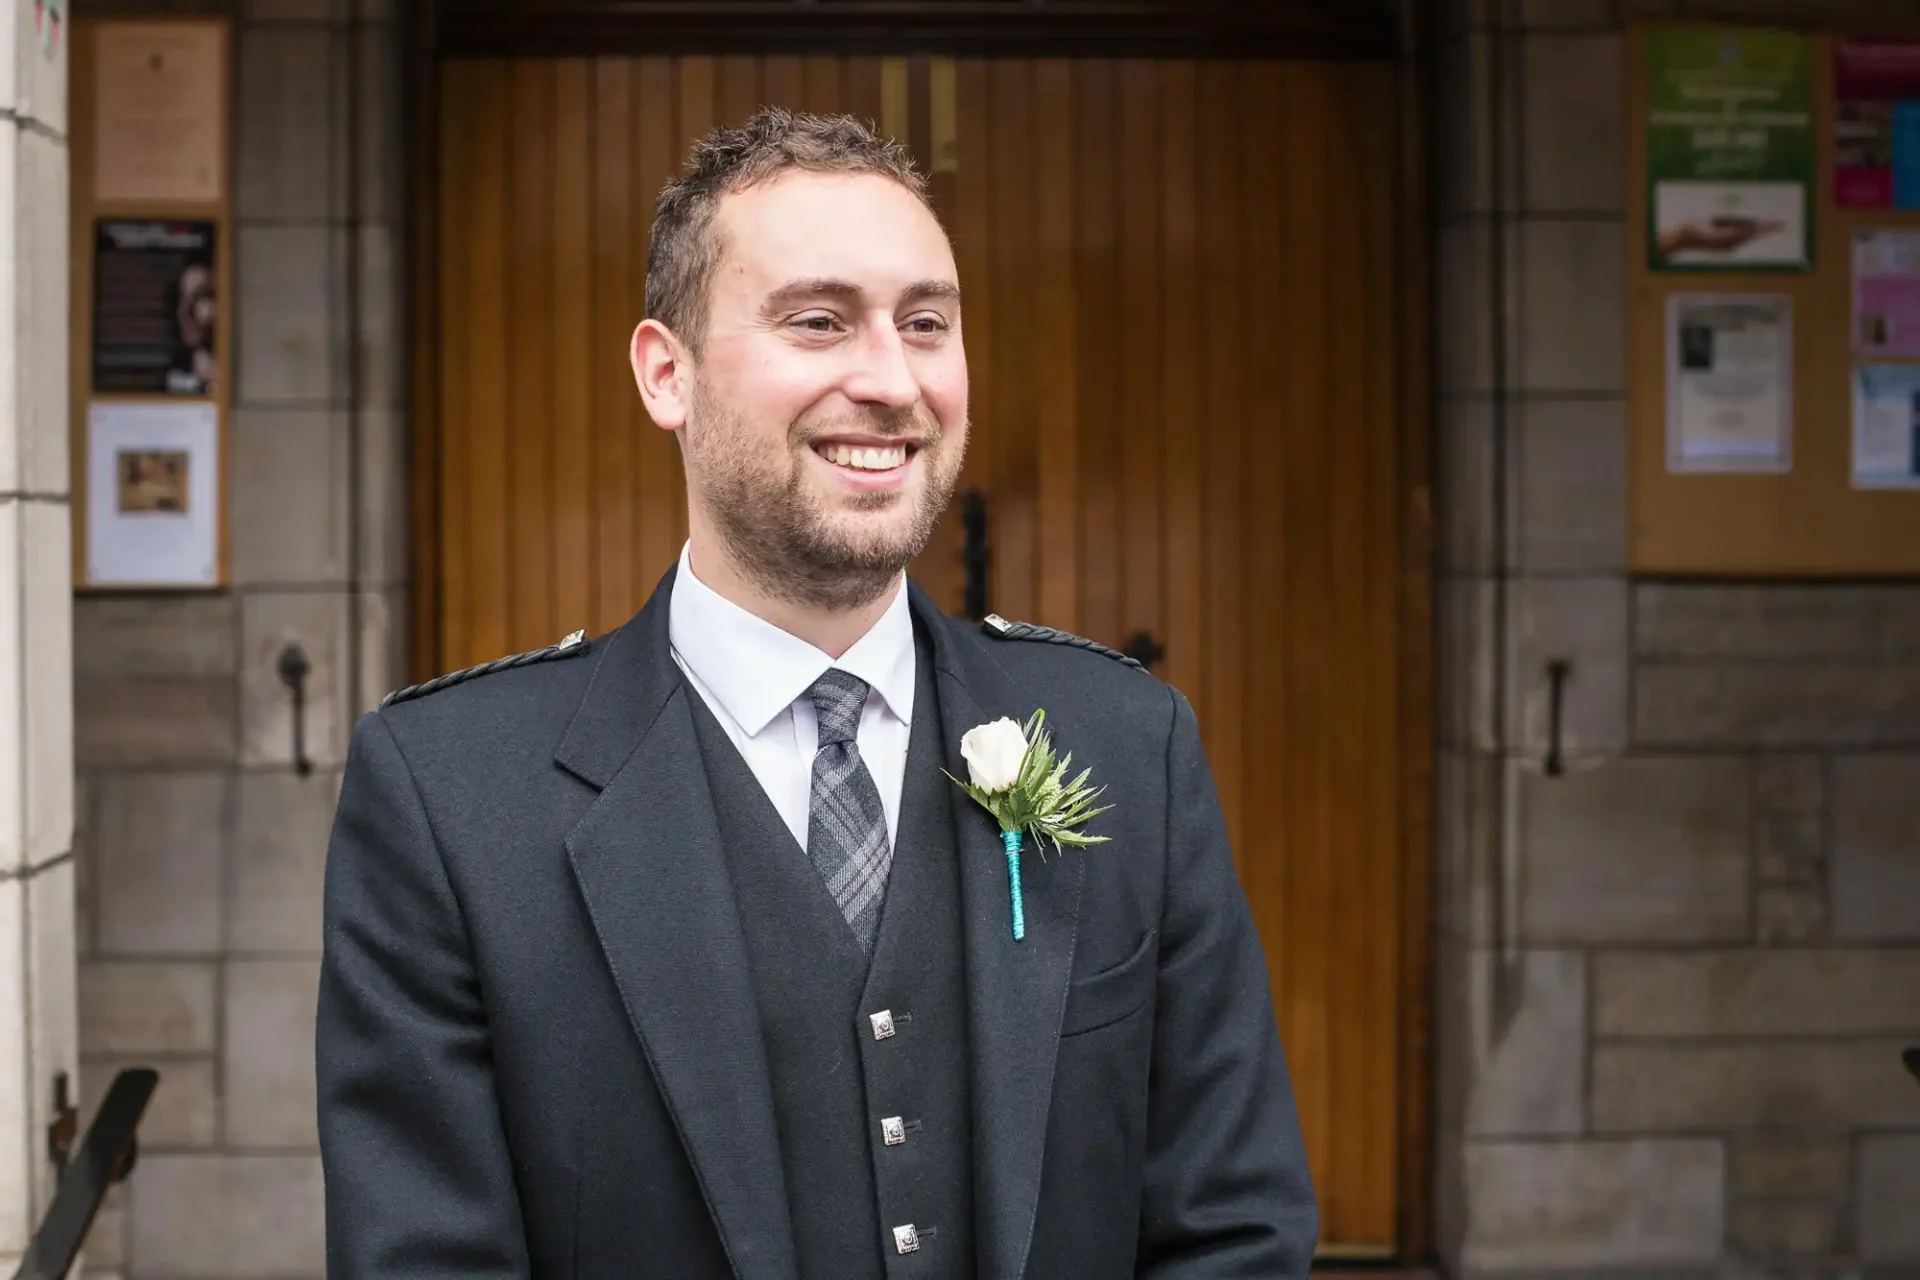 Man in a formal uniform with a boutonniere smiling outside a building with wooden doors.